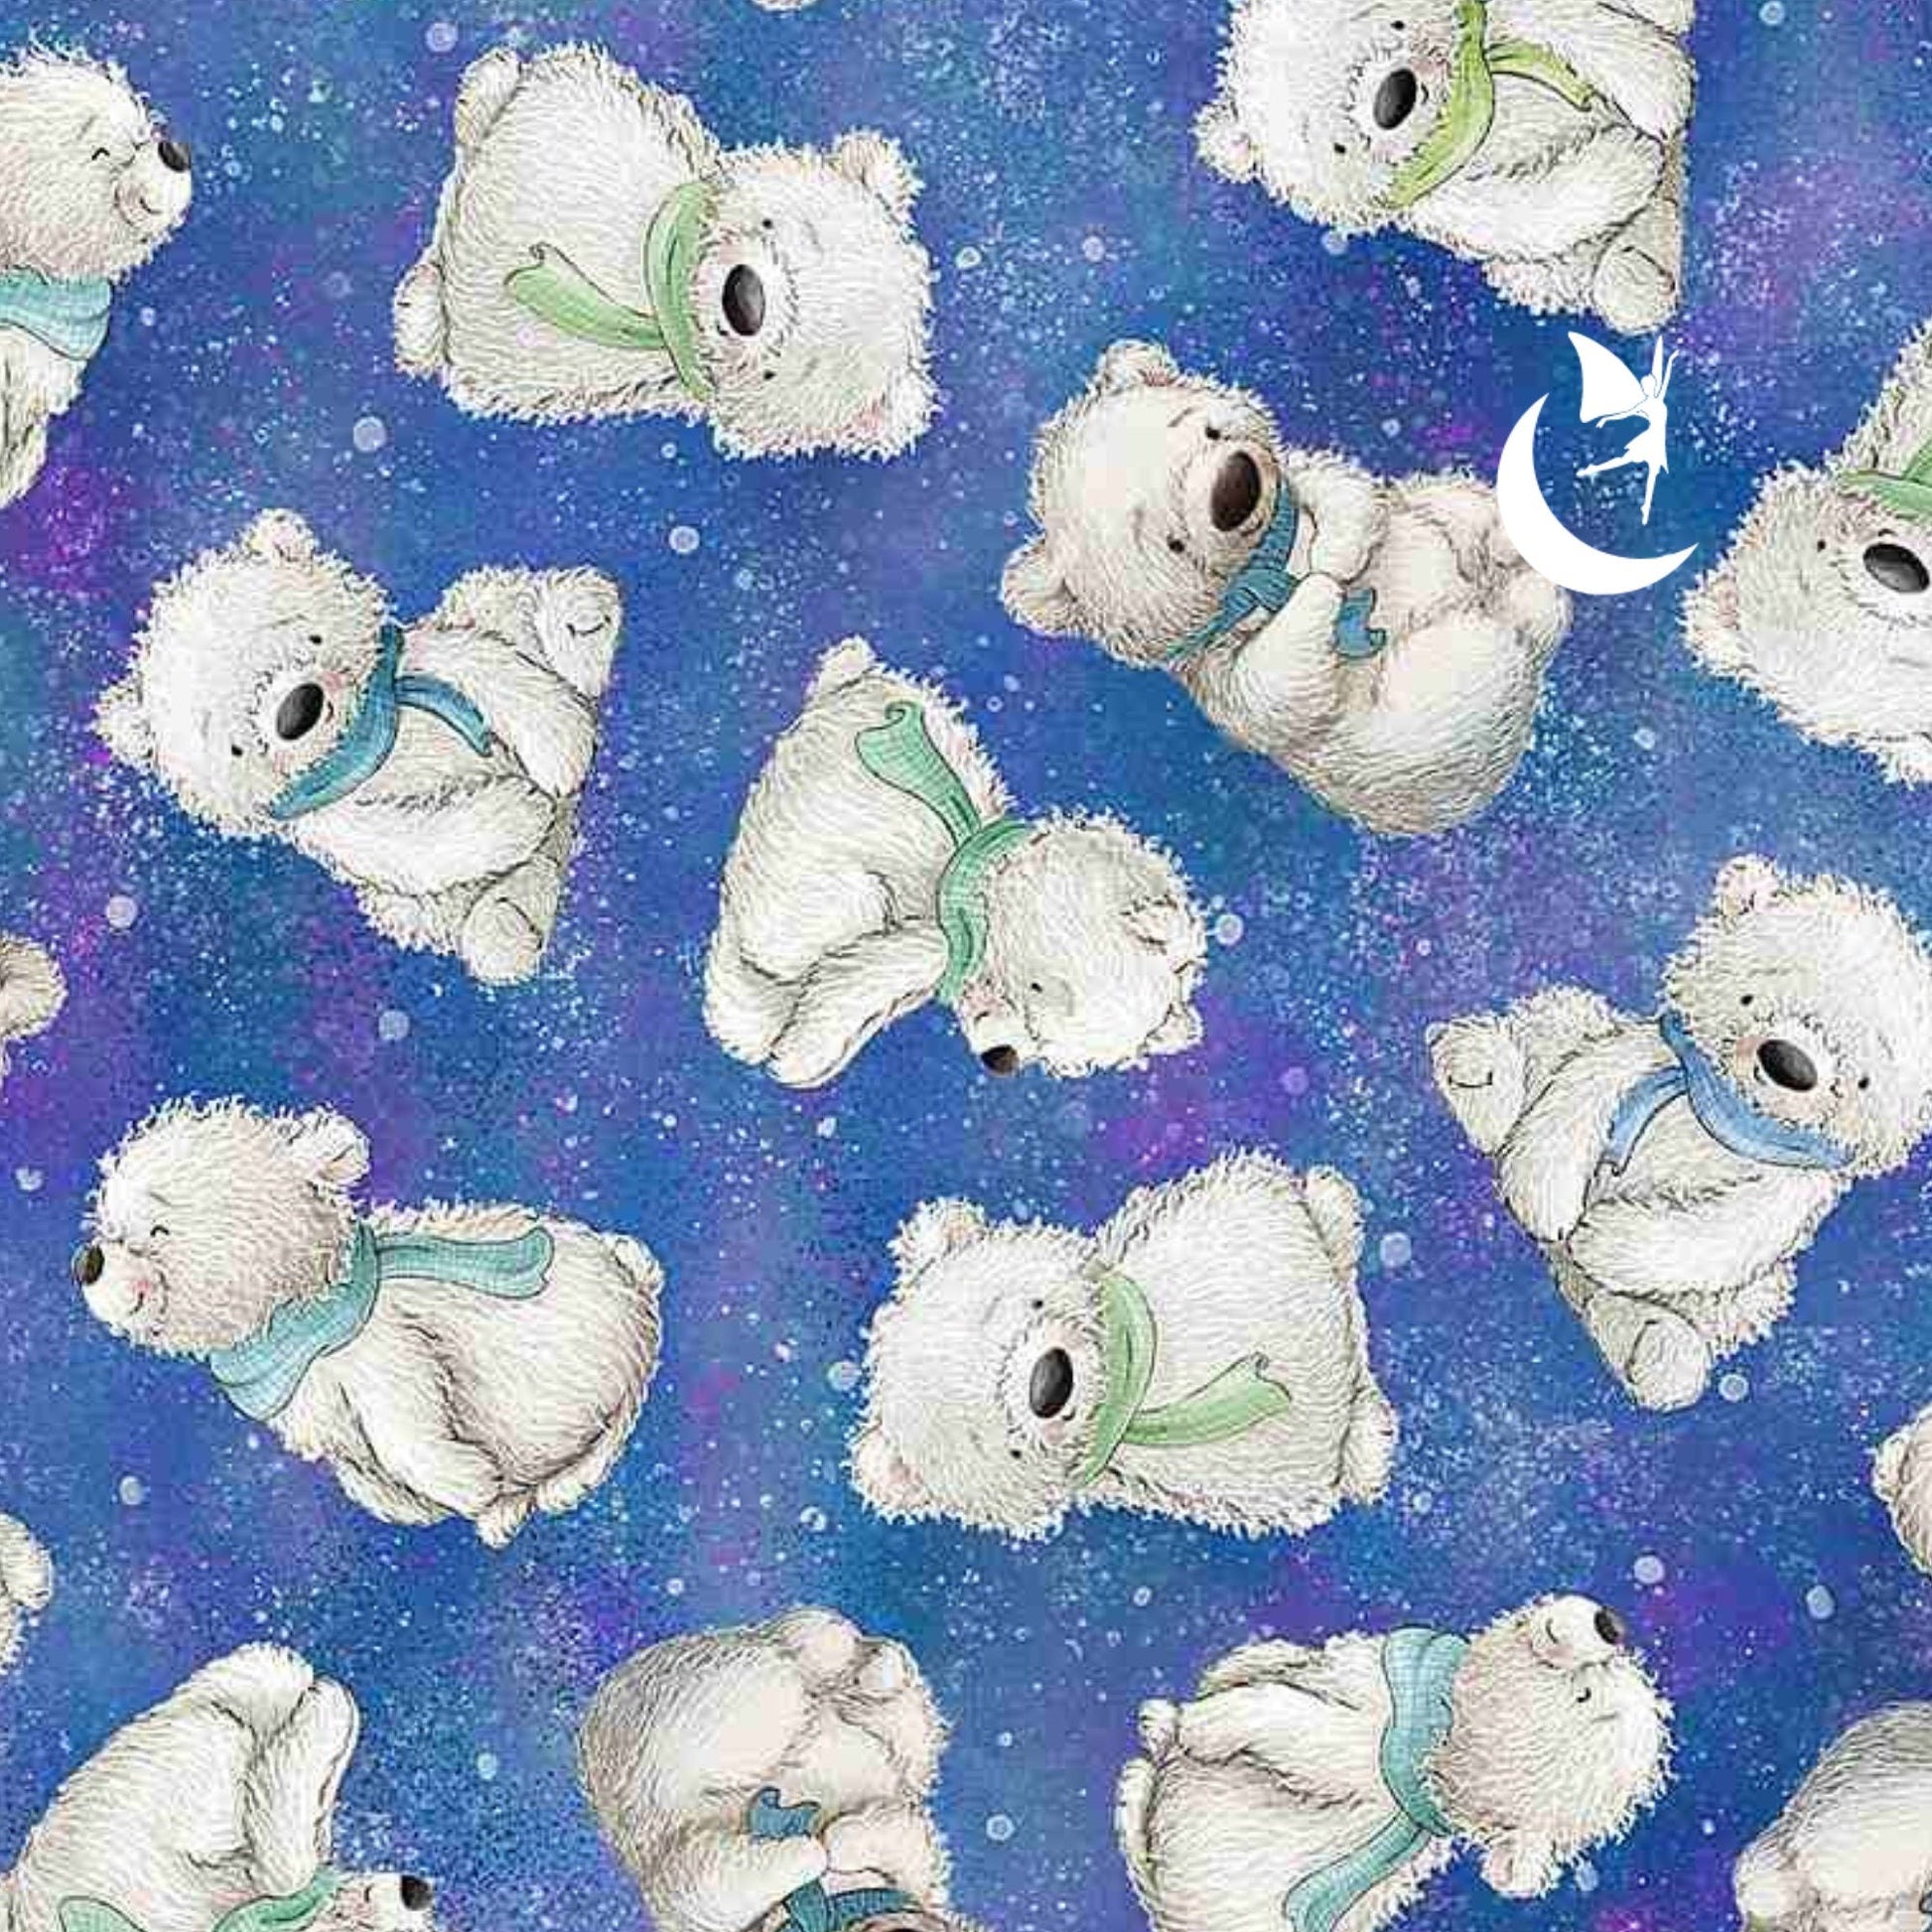 Angels Neverland Quilt Kit Arctic Nights Aurora Borealis Fabric with Bunnies